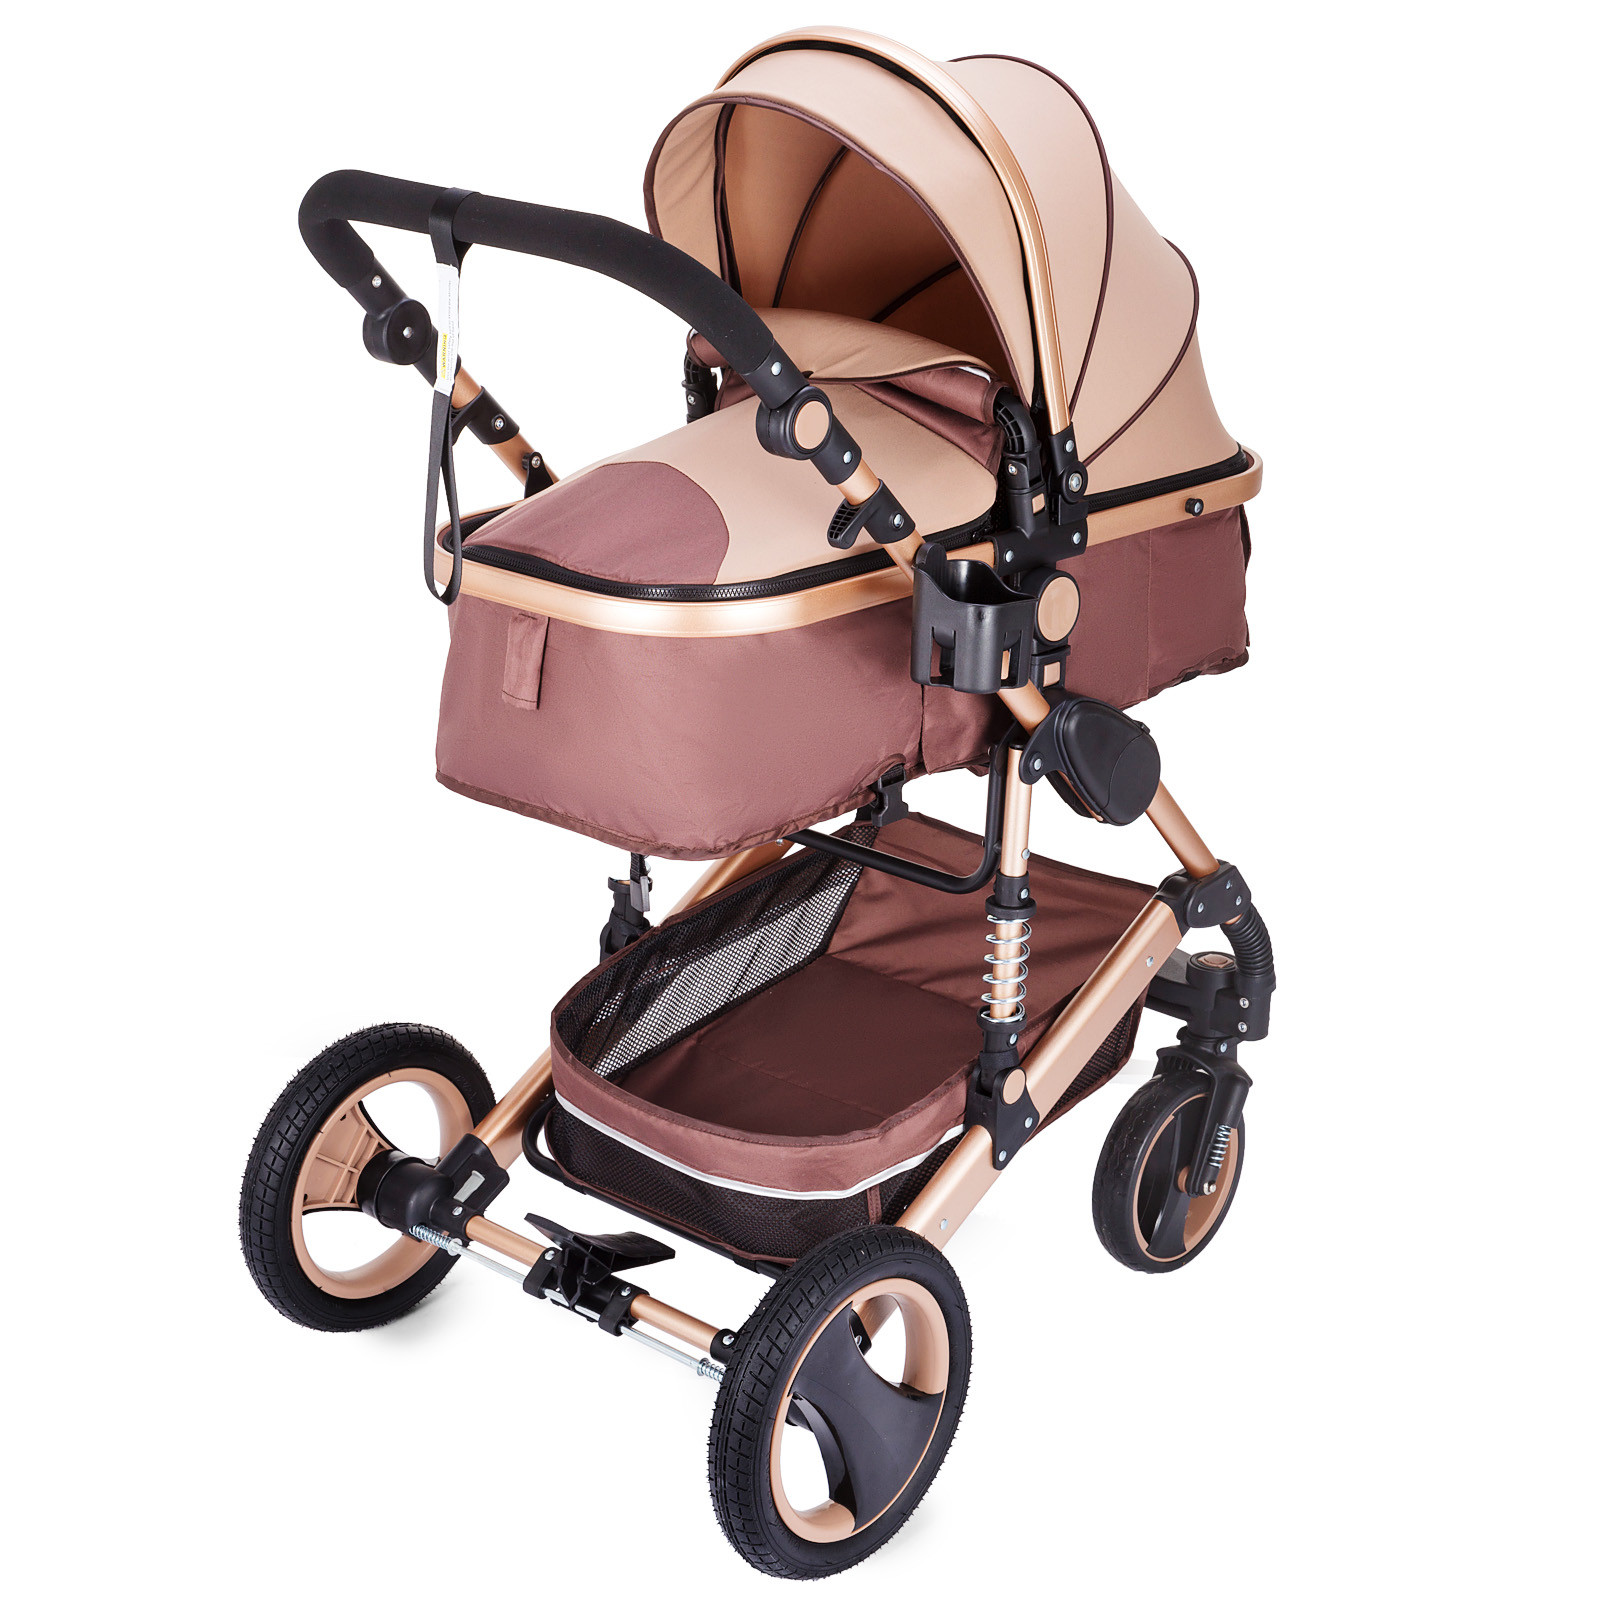 Luxury Baby Stroller 3 In 1 Pushchair Foldable Buggy Infant Travel With